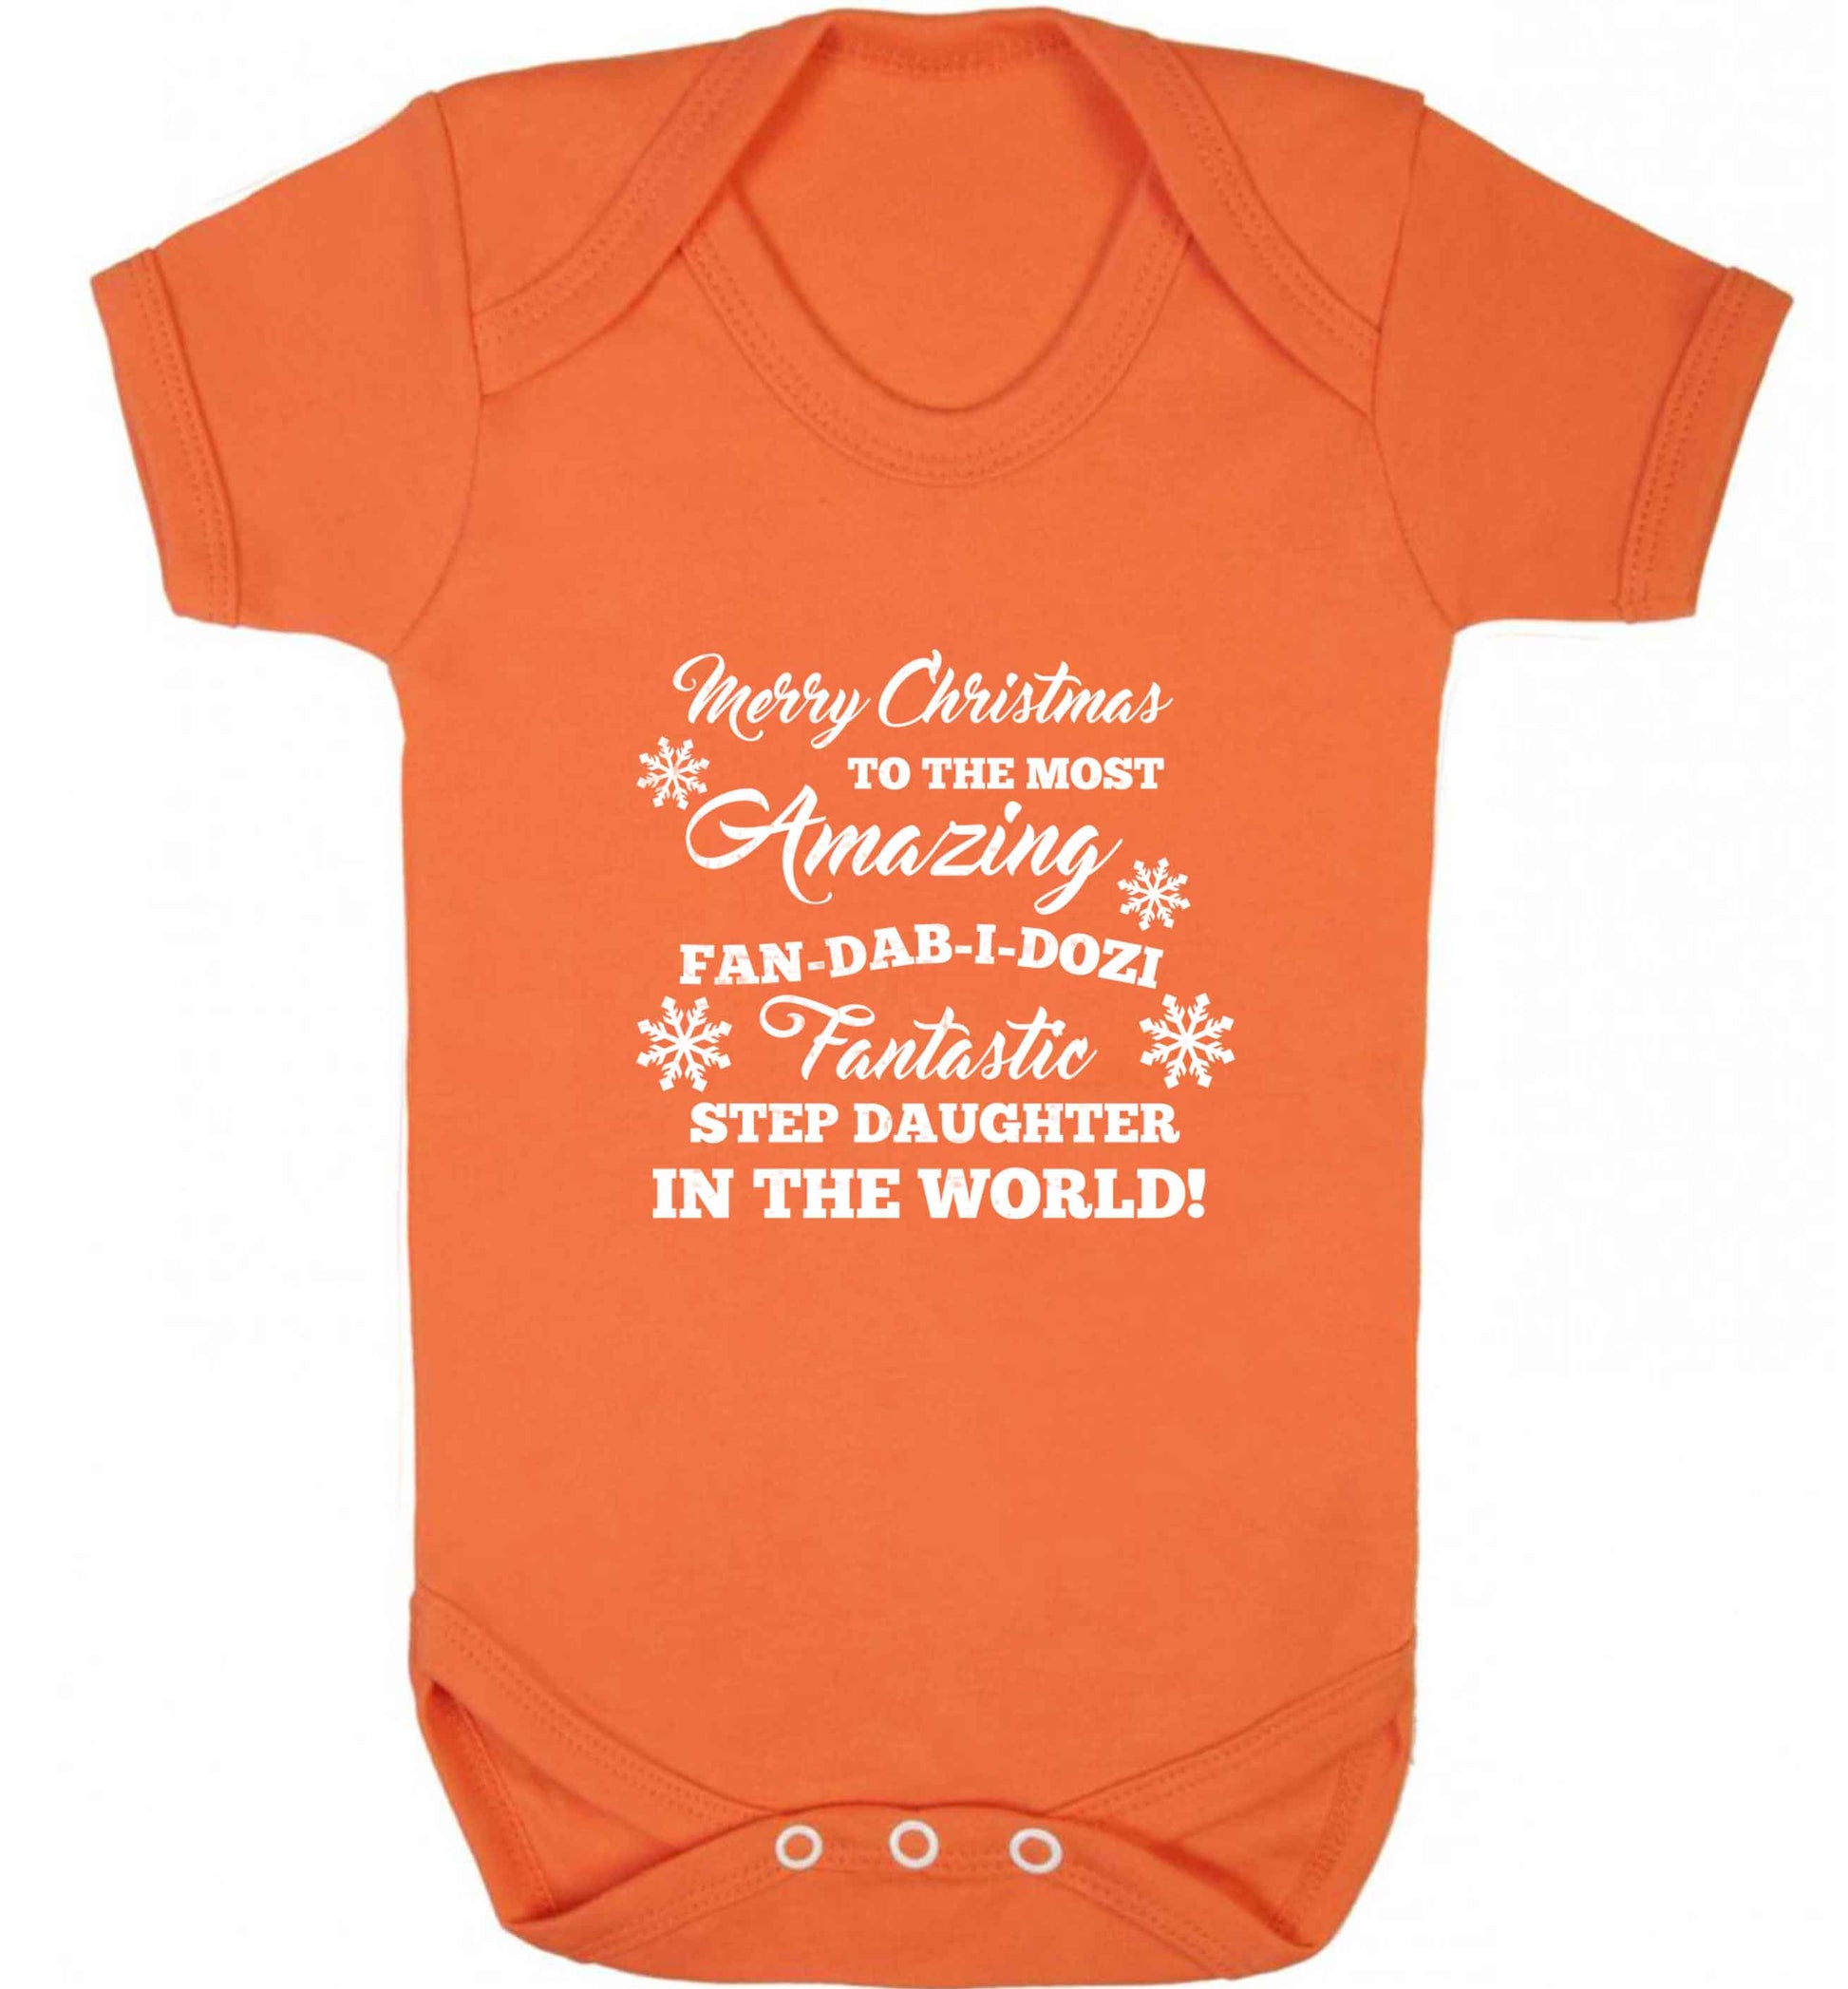 Merry Christmas to the most amazing fan-dab-i-dozi fantasic Step Daughter in the world baby vest orange 18-24 months